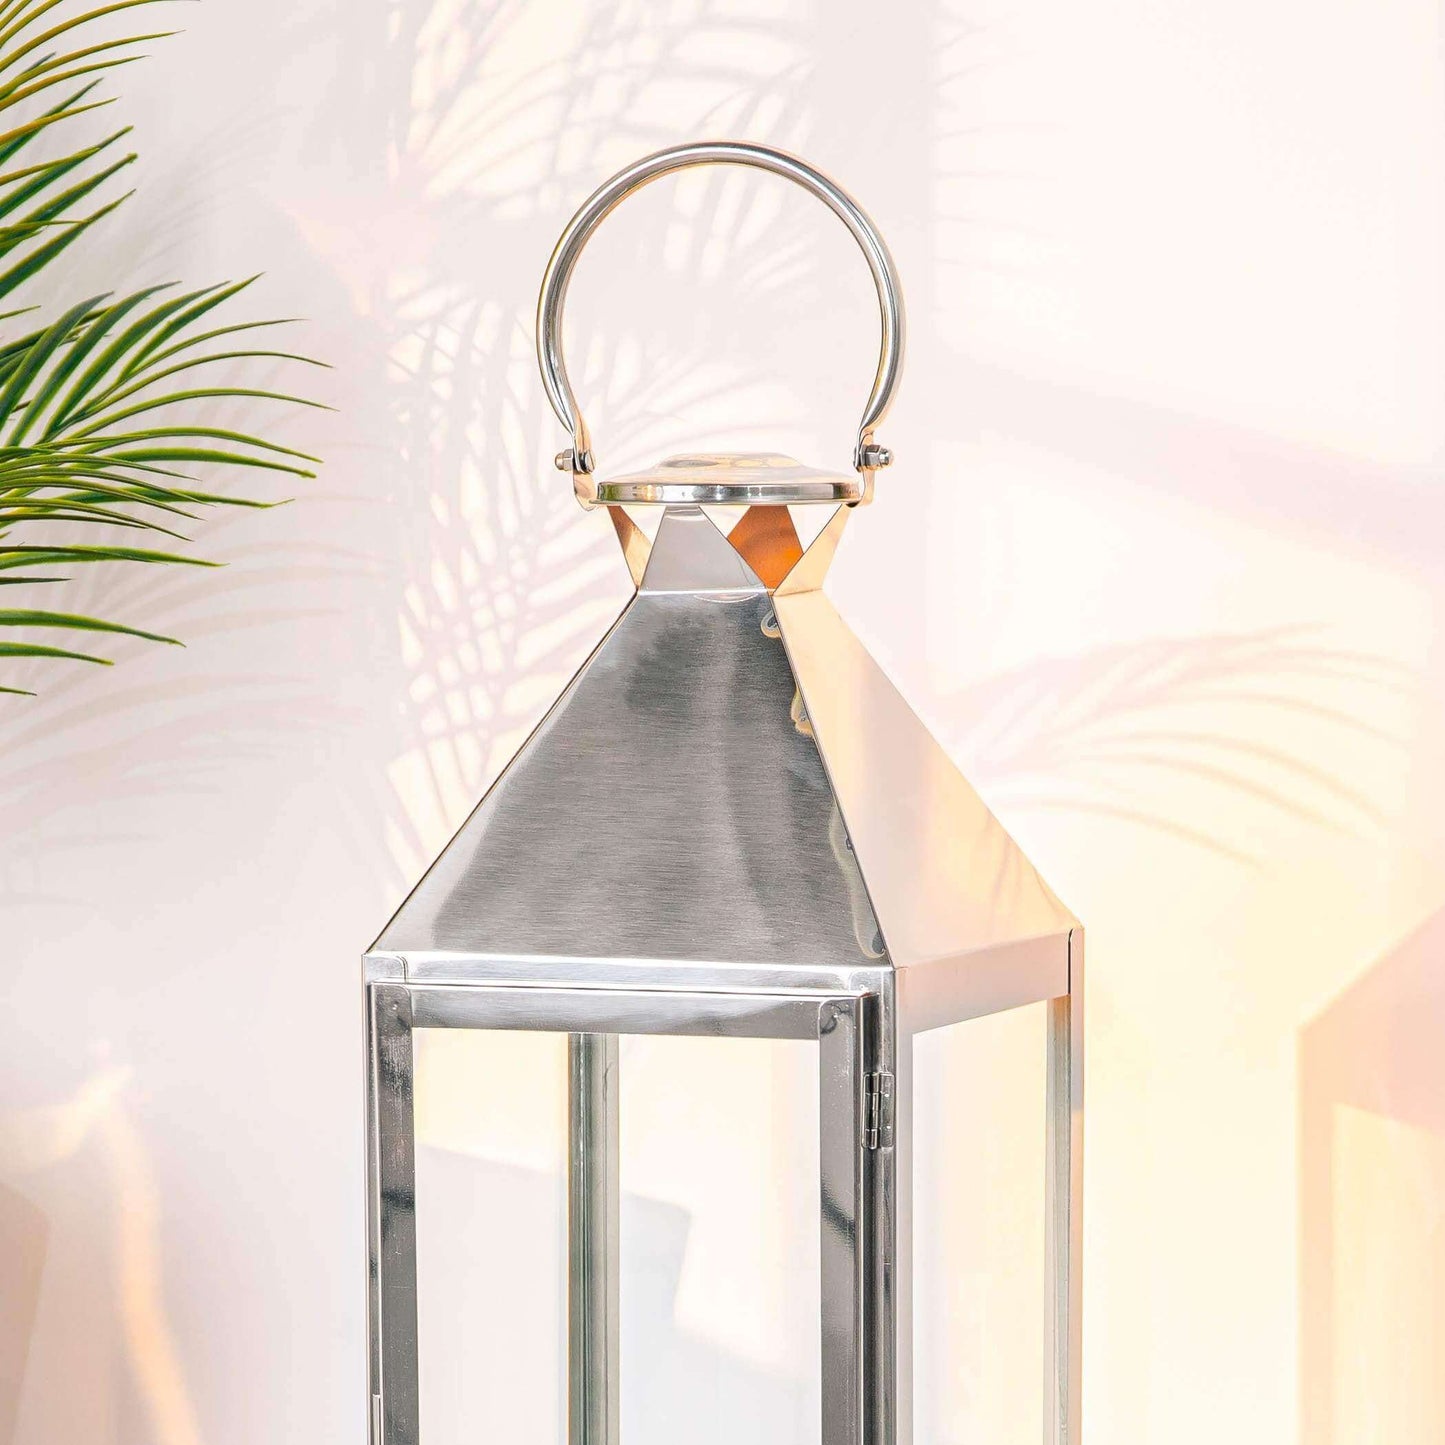 Lights  -  Comet Stainless Steel And Glass Lantern 65cm  -  60000250